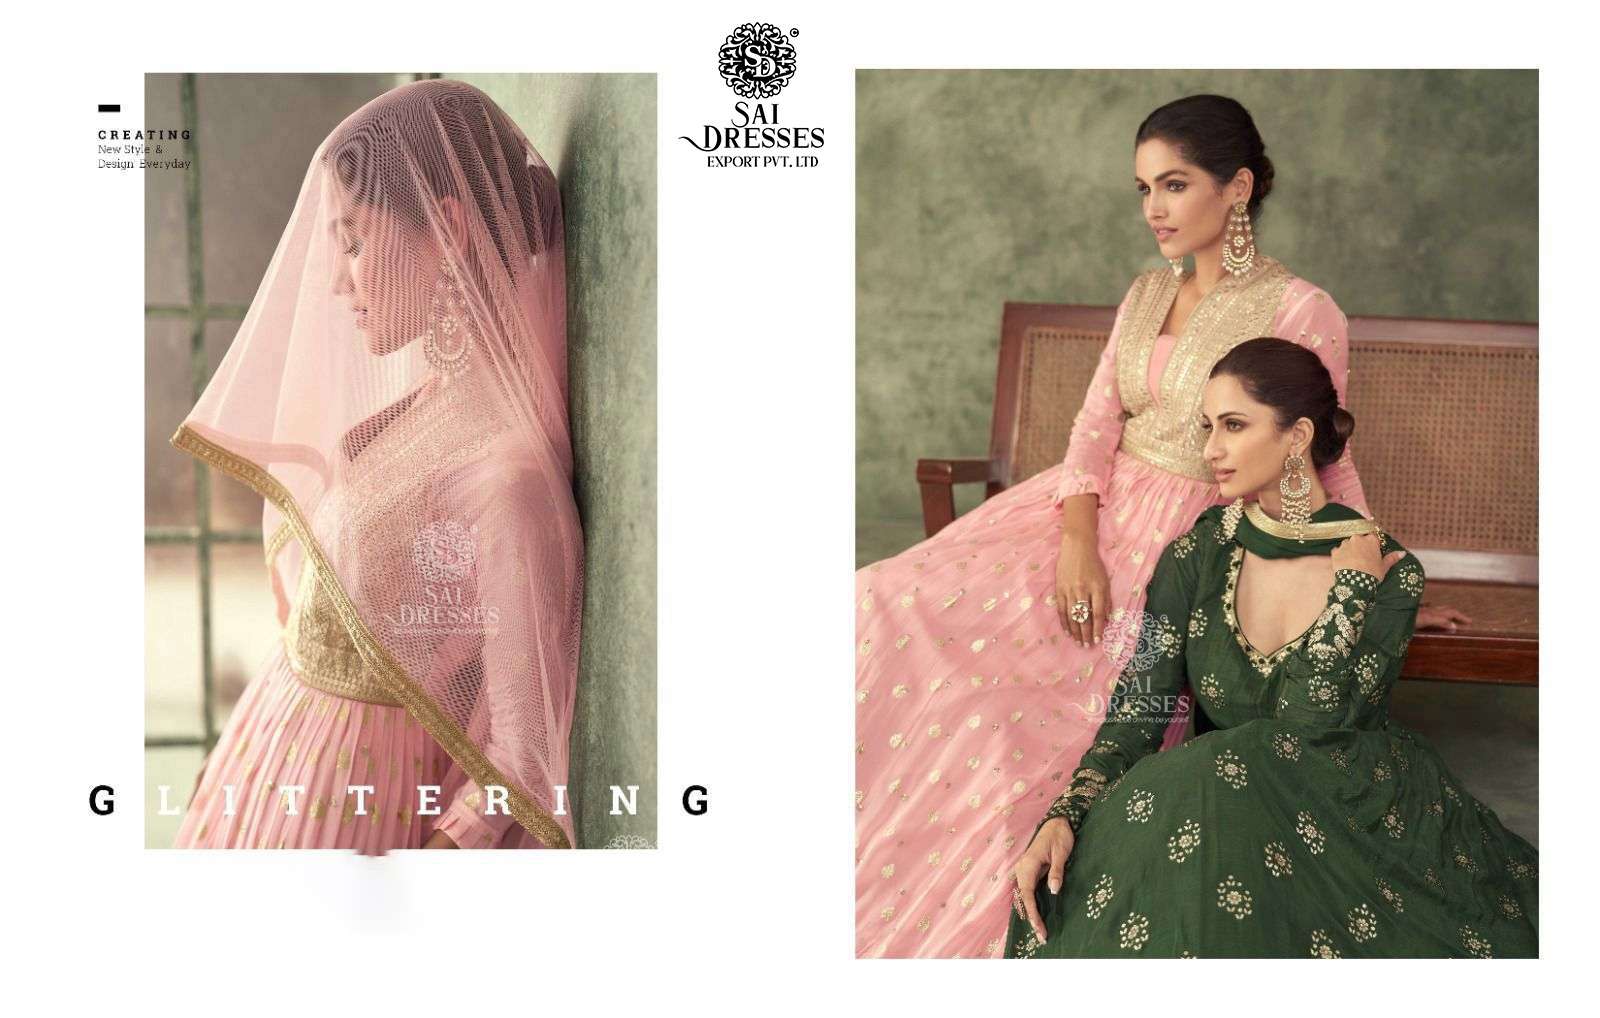 SAI DRESSES PRESENT SHINE READYMADE FESTIVE WEAR DESIGNER LONG GOWN WITH DUPATTA IN WHOLESALE RATE IN SURAT